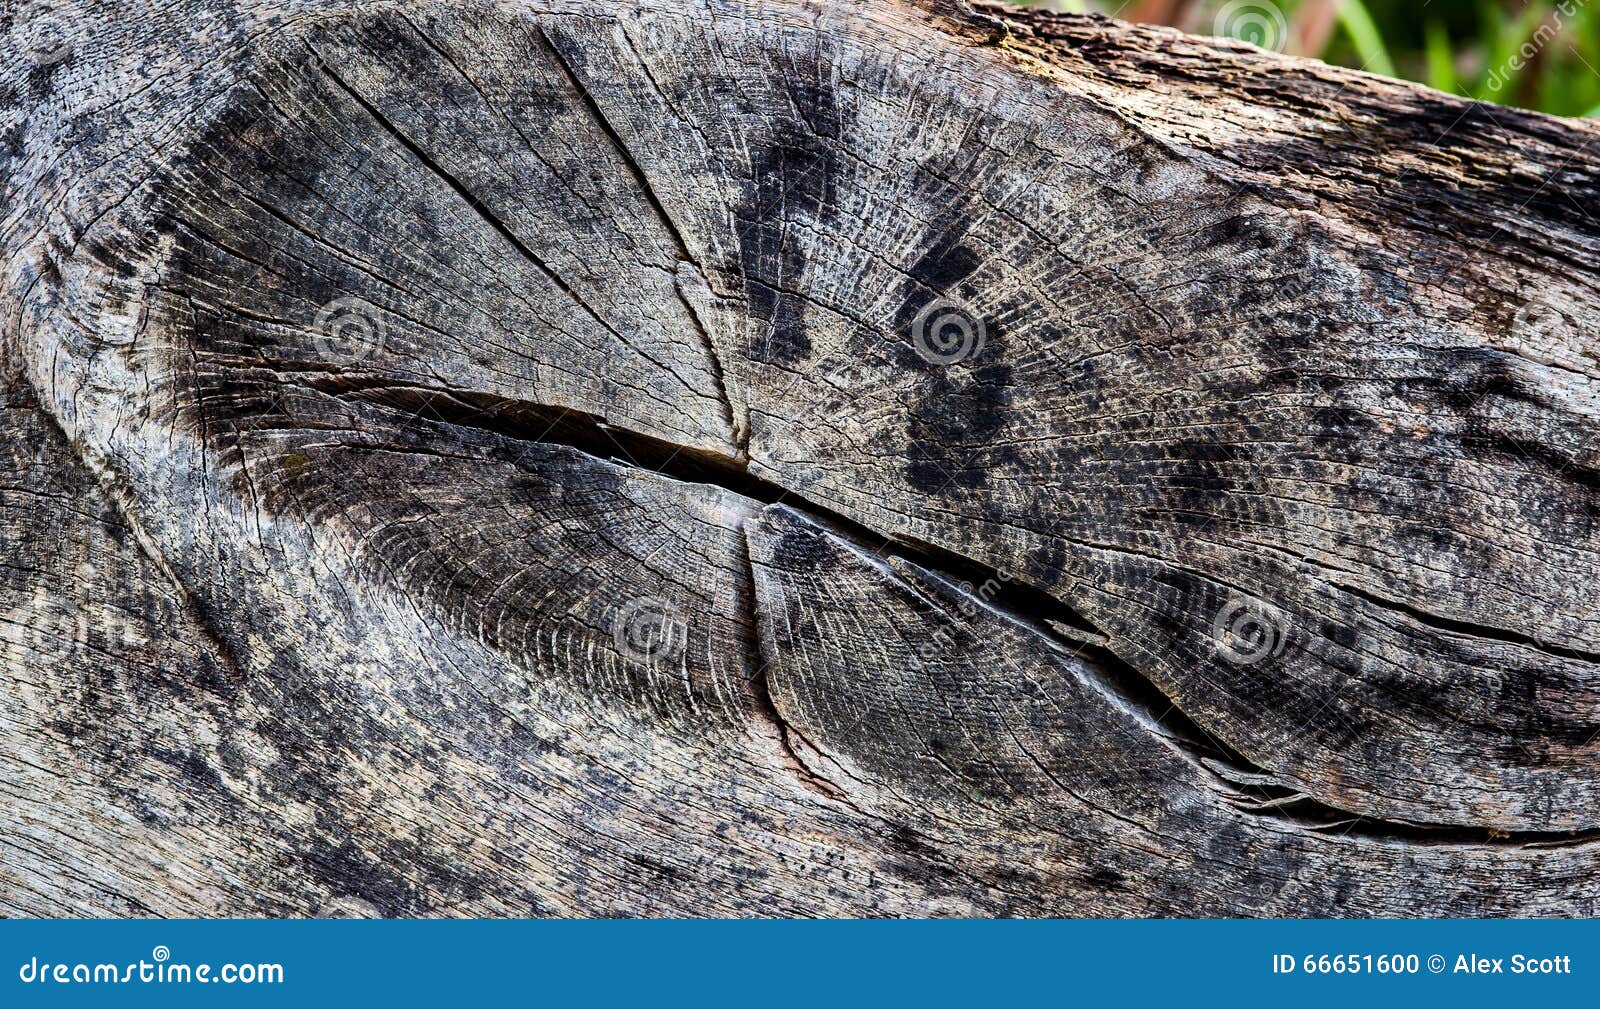 Section through pine log stock photo. Image of plank - 66651600